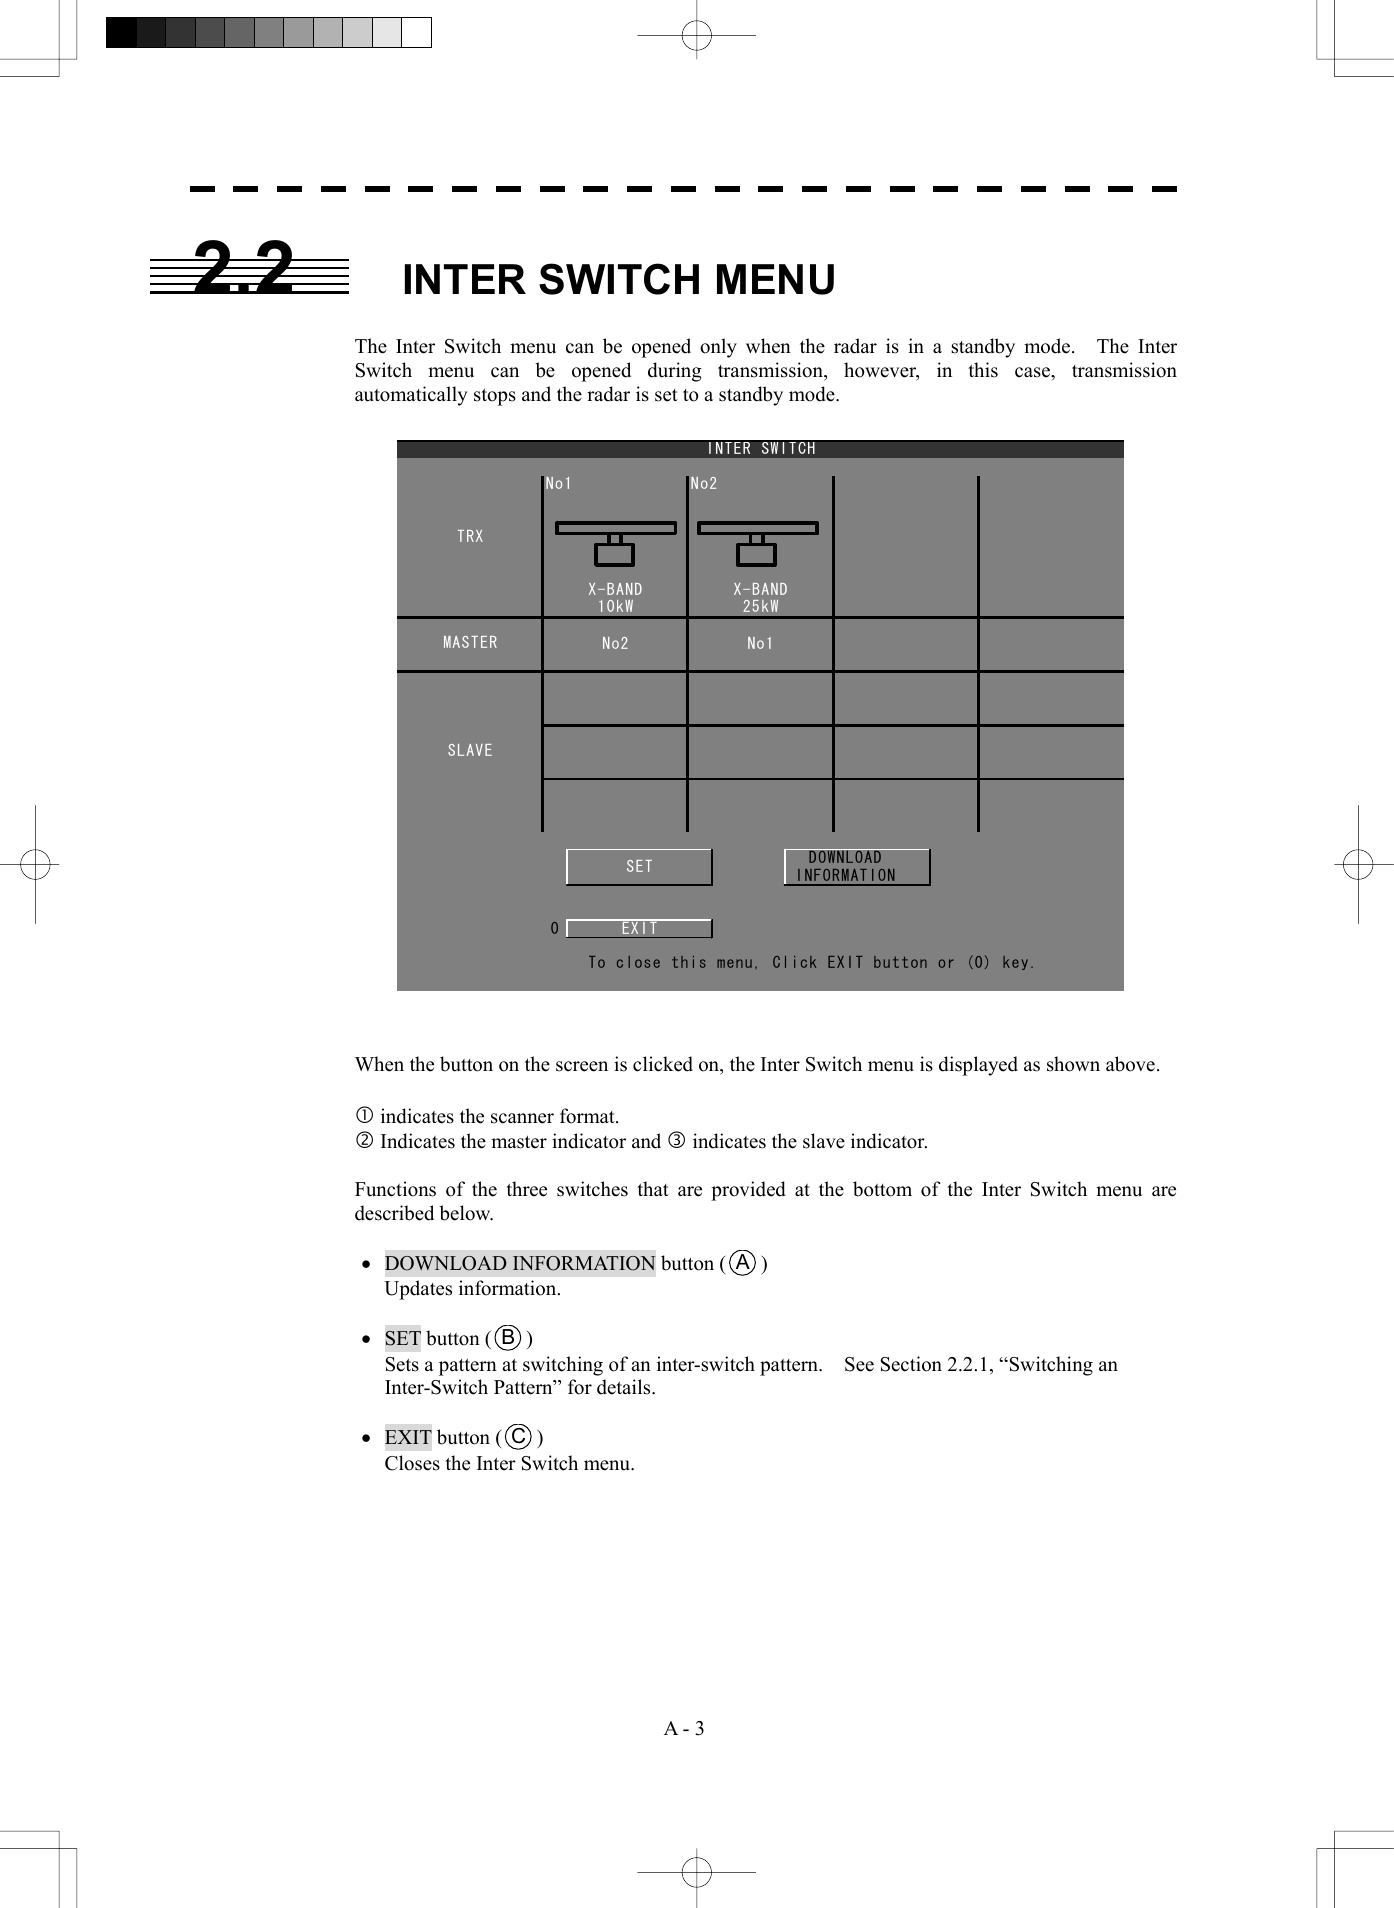  A - 3 0EXITINFORMATIONDOWNLOADSETX-BAND10kWX-BANDSLAVENo1MASTER No2 No1No2 To close this menu, Click EXIT button or (0) key.25kWINTER SWITCHTRX2.2 INTER SWITCH MENU  The Inter Switch menu can be opened only when the radar is in a standby mode.  The Inter Switch menu can be opened during transmission, however, in this case, transmission automatically stops and the radar is set to a standby mode.                            When the button on the screen is clicked on, the Inter Switch menu is displayed as shown above.  c indicates the scanner format. d Indicates the master indicator and e indicates the slave indicator.  Functions of the three switches that are provided at the bottom of the Inter Switch menu are described below.  •  DOWNLOAD INFORMATION button ( A) Updates information.   •  SET button ( B) Sets a pattern at switching of an inter-switch pattern.    See Section 2.2.1, “Switching an Inter-Switch Pattern” for details.  •  EXIT button ( C) Closes the Inter Switch menu.  